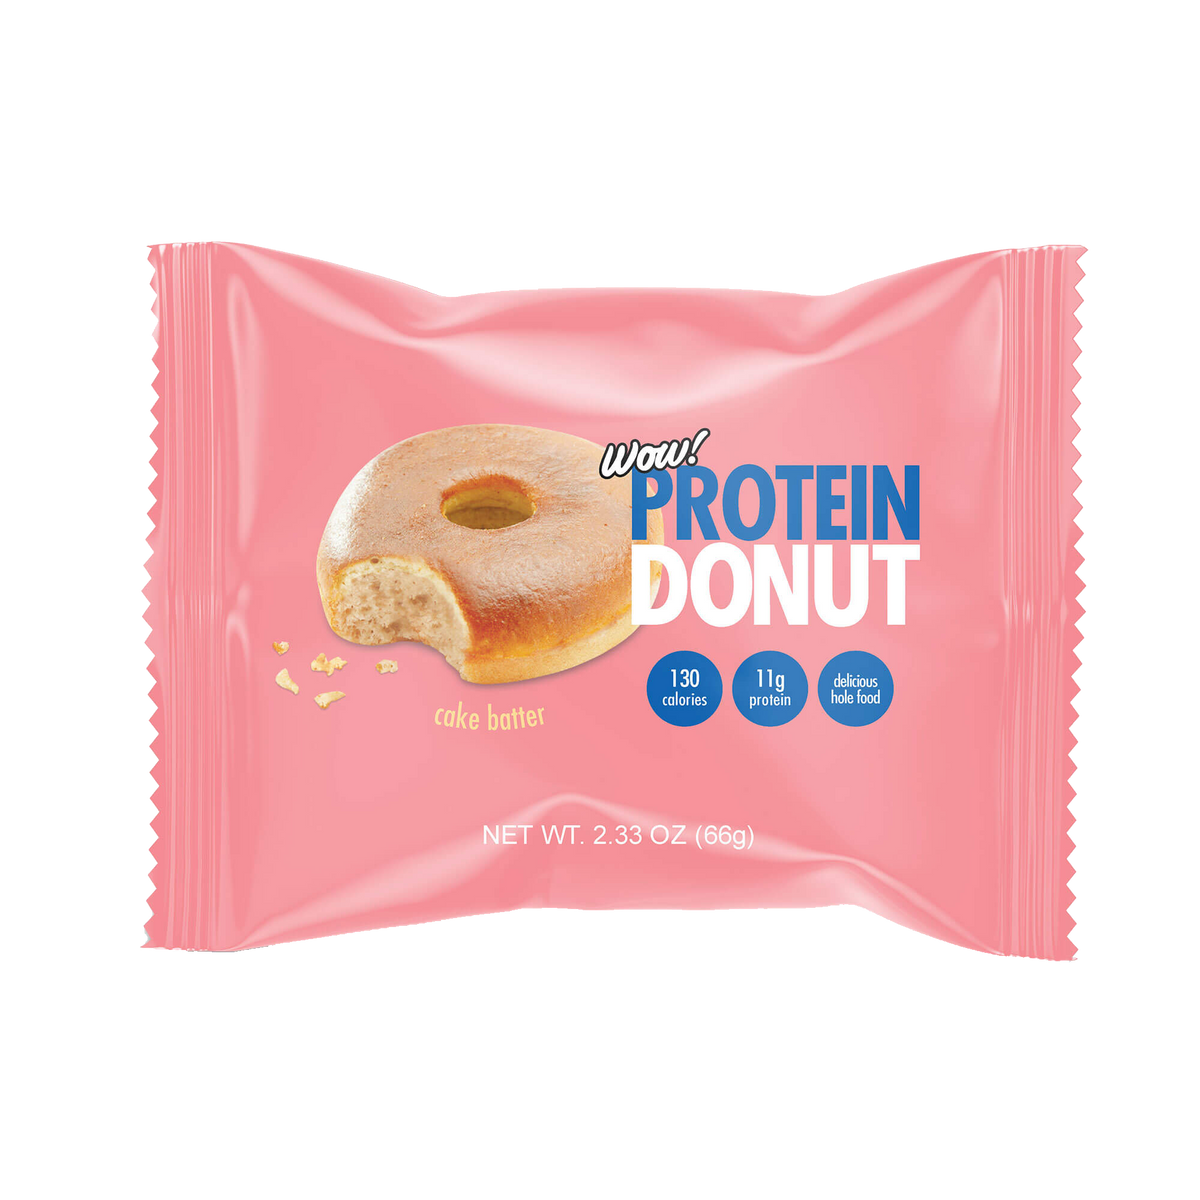 [Wow! Protein Donuts] Cake Batter | 2.33oz | 1 Donut